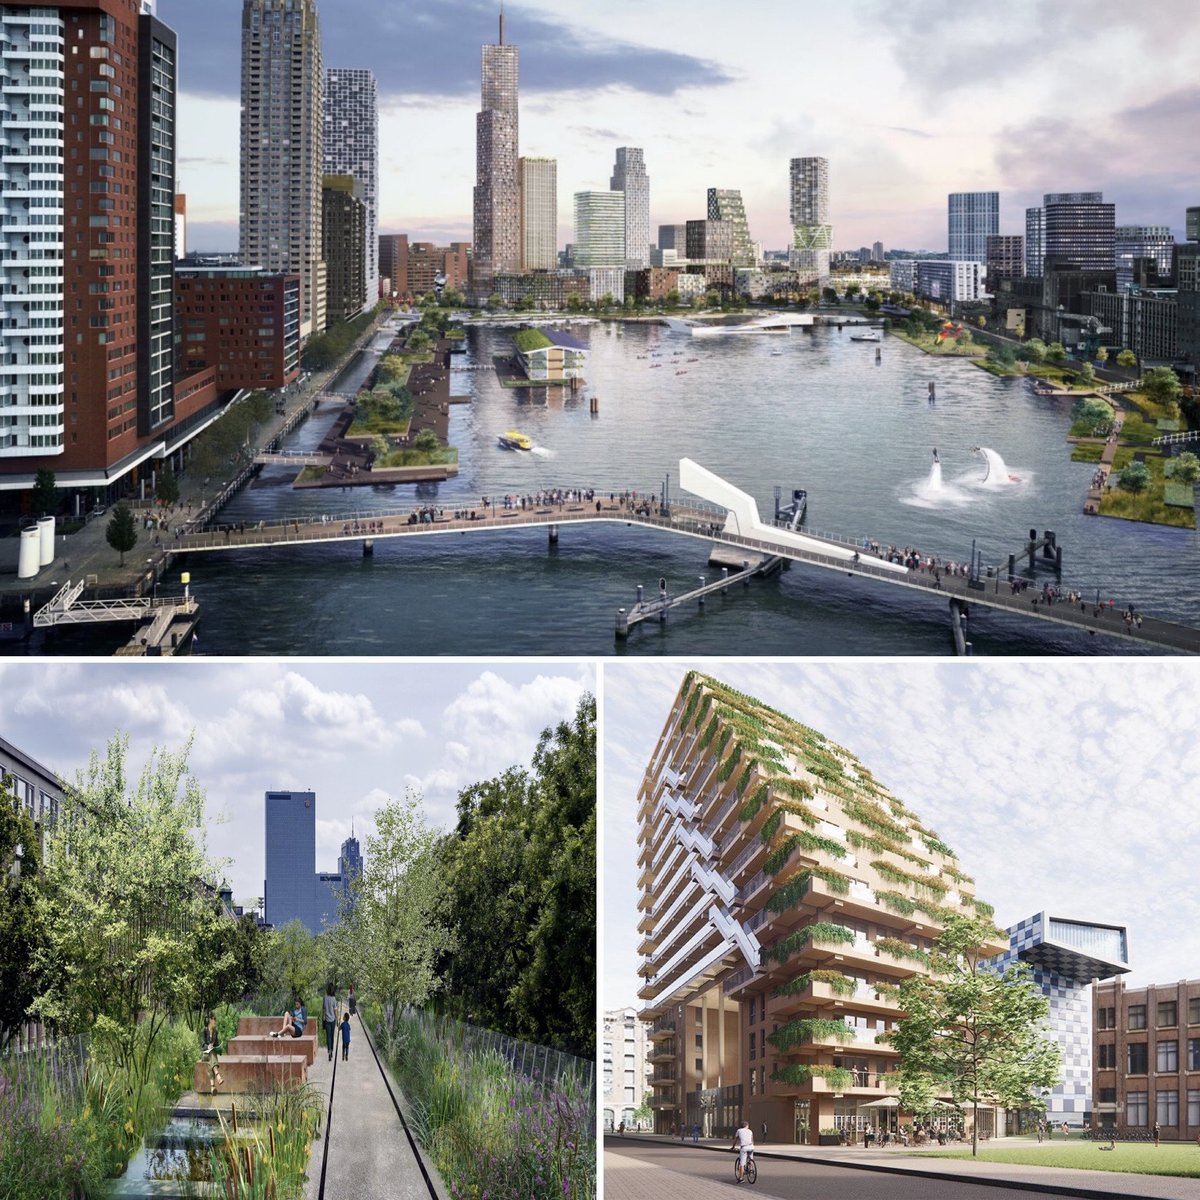 🚨Attention journalists How do you design #resilient cities of the future? Is it possible to create space for nature, animals, and water when there is a high demand for housing? ✍️ Join our #presstrip #Rotterdam from Wed 15 - Fri 17 May about #climate adaptive #urbanism